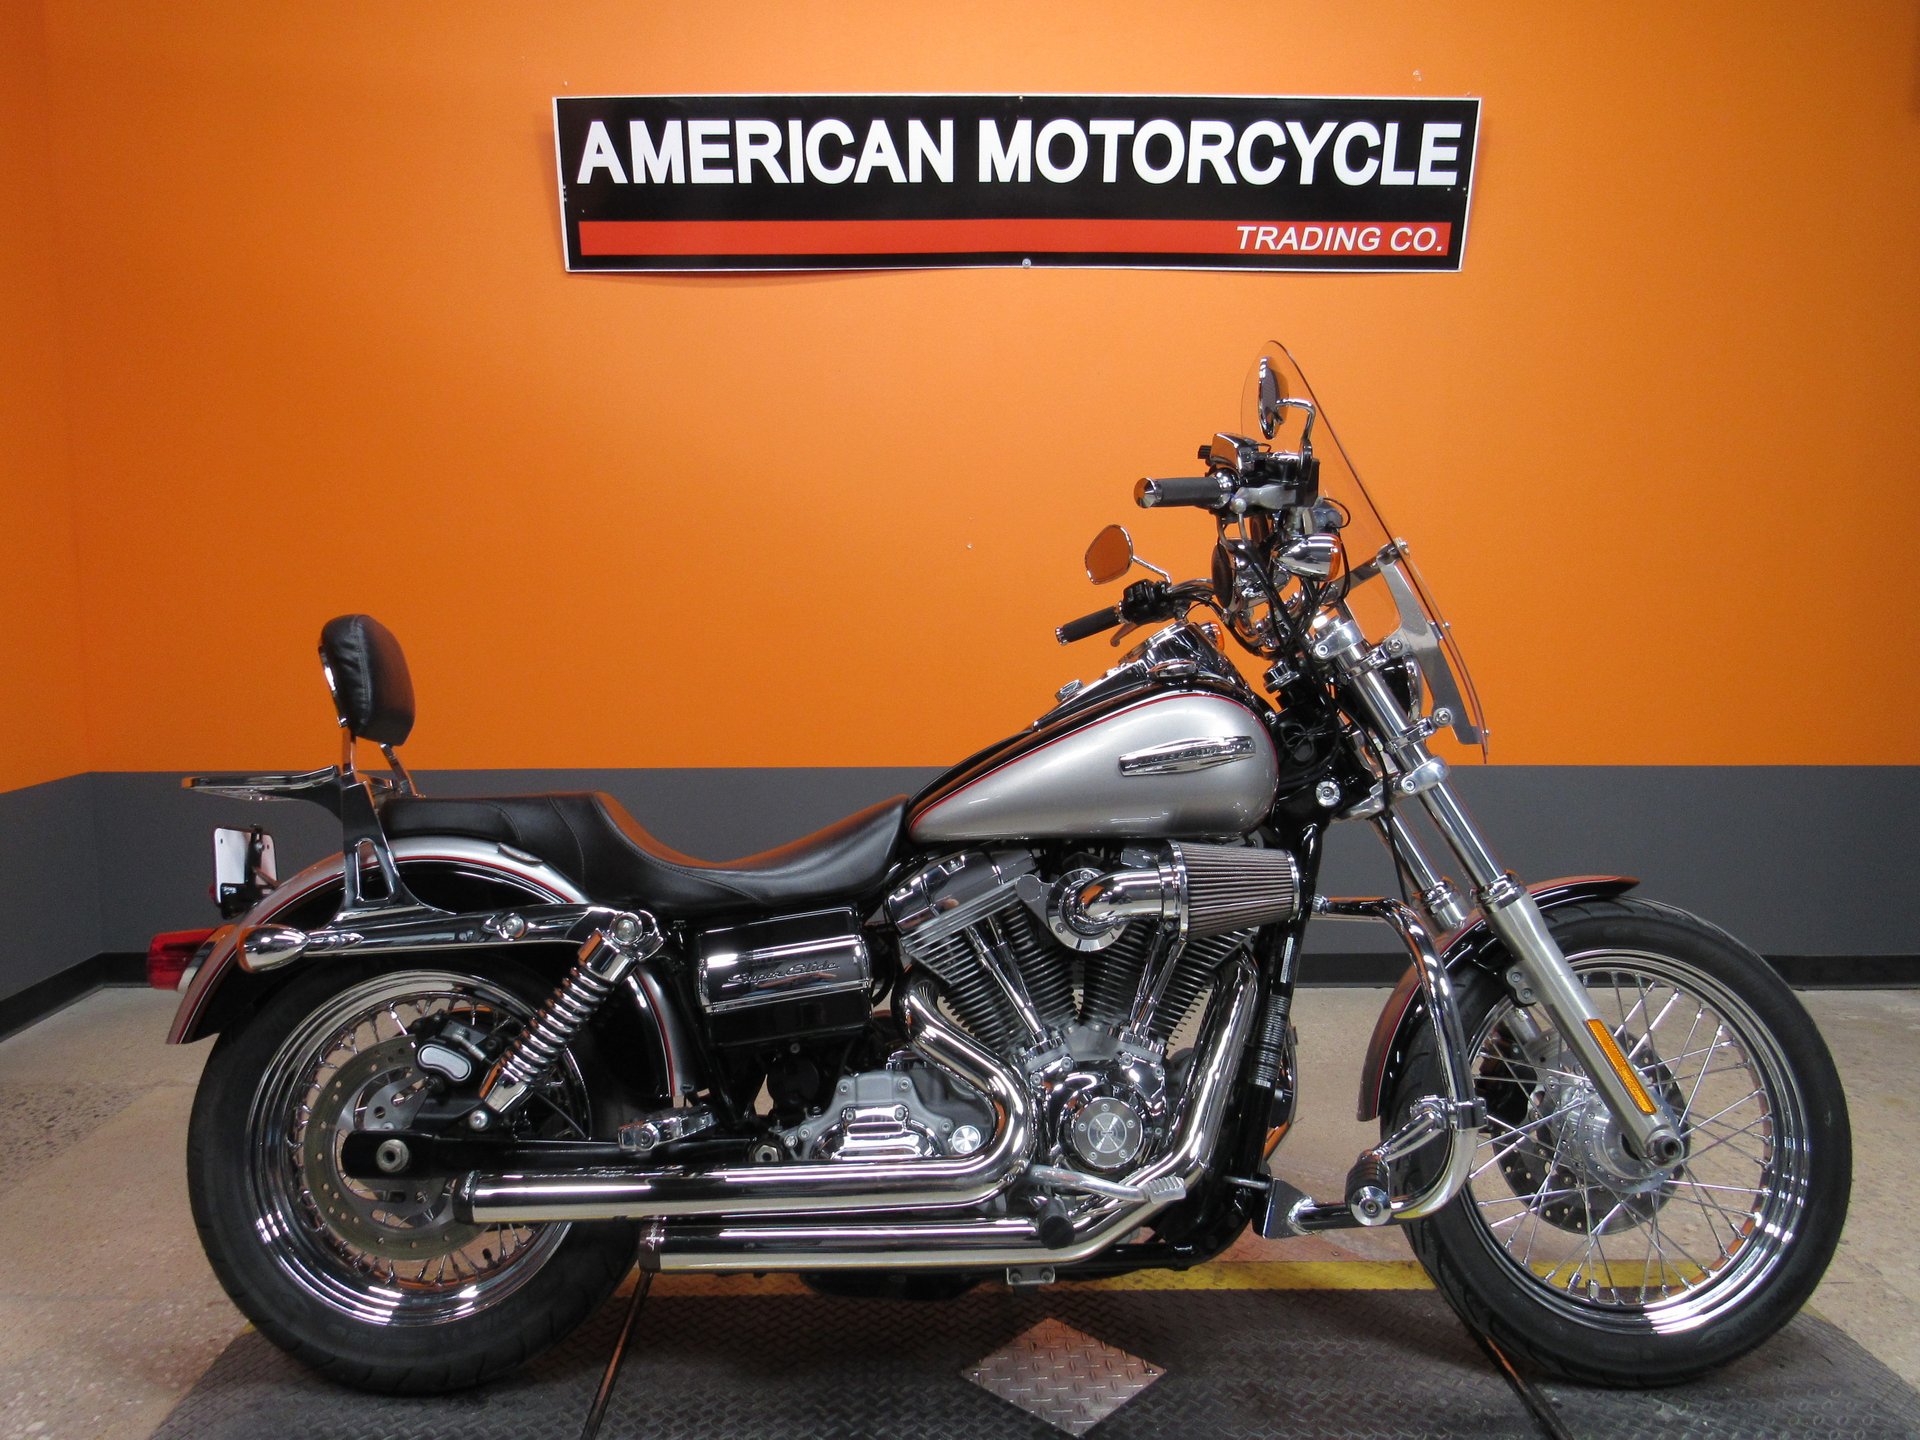 2009 Harley-Davidson Dyna Super Glide | American Motorcycle Trading Company  - Used Harley Davidson Motorcycles